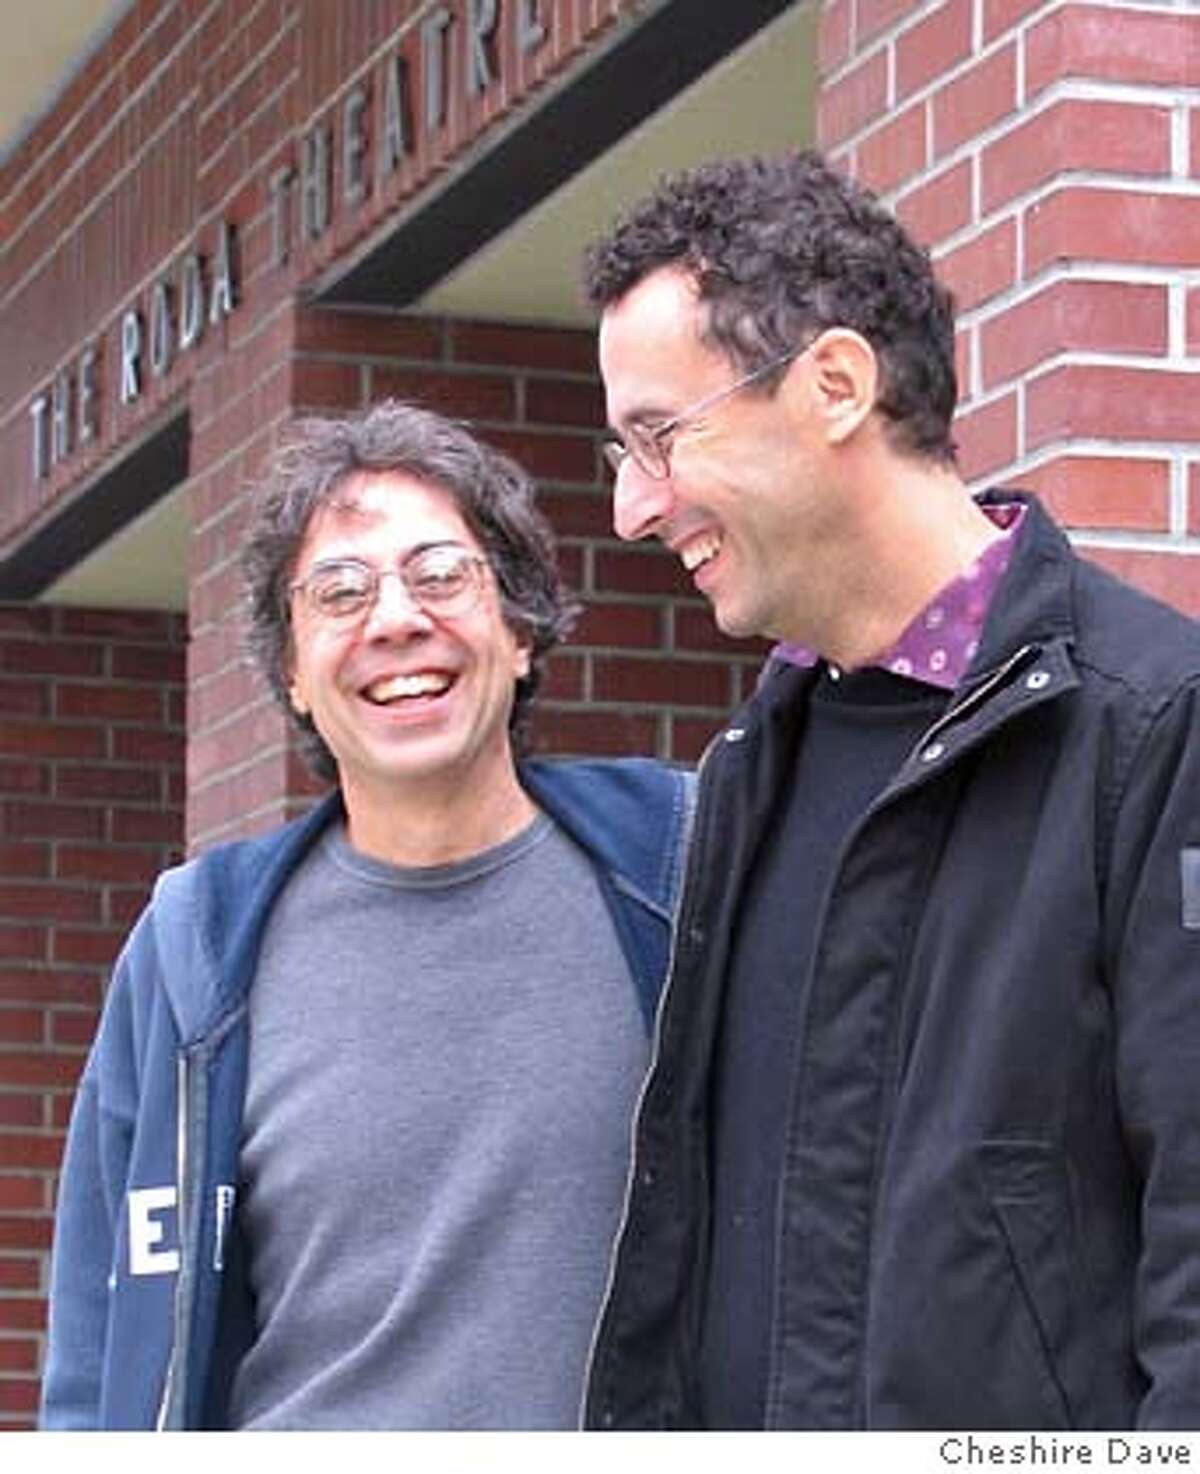 (l to r) Tony Taccone, artistic director of Berkeley Repertory Theatre, and playwright Tony Kushner in front of Berkeley Rep�s Roda Theatre where these long-time collaborators recently staged Brundibar. (Photographer: Cheshire Dave) SFC